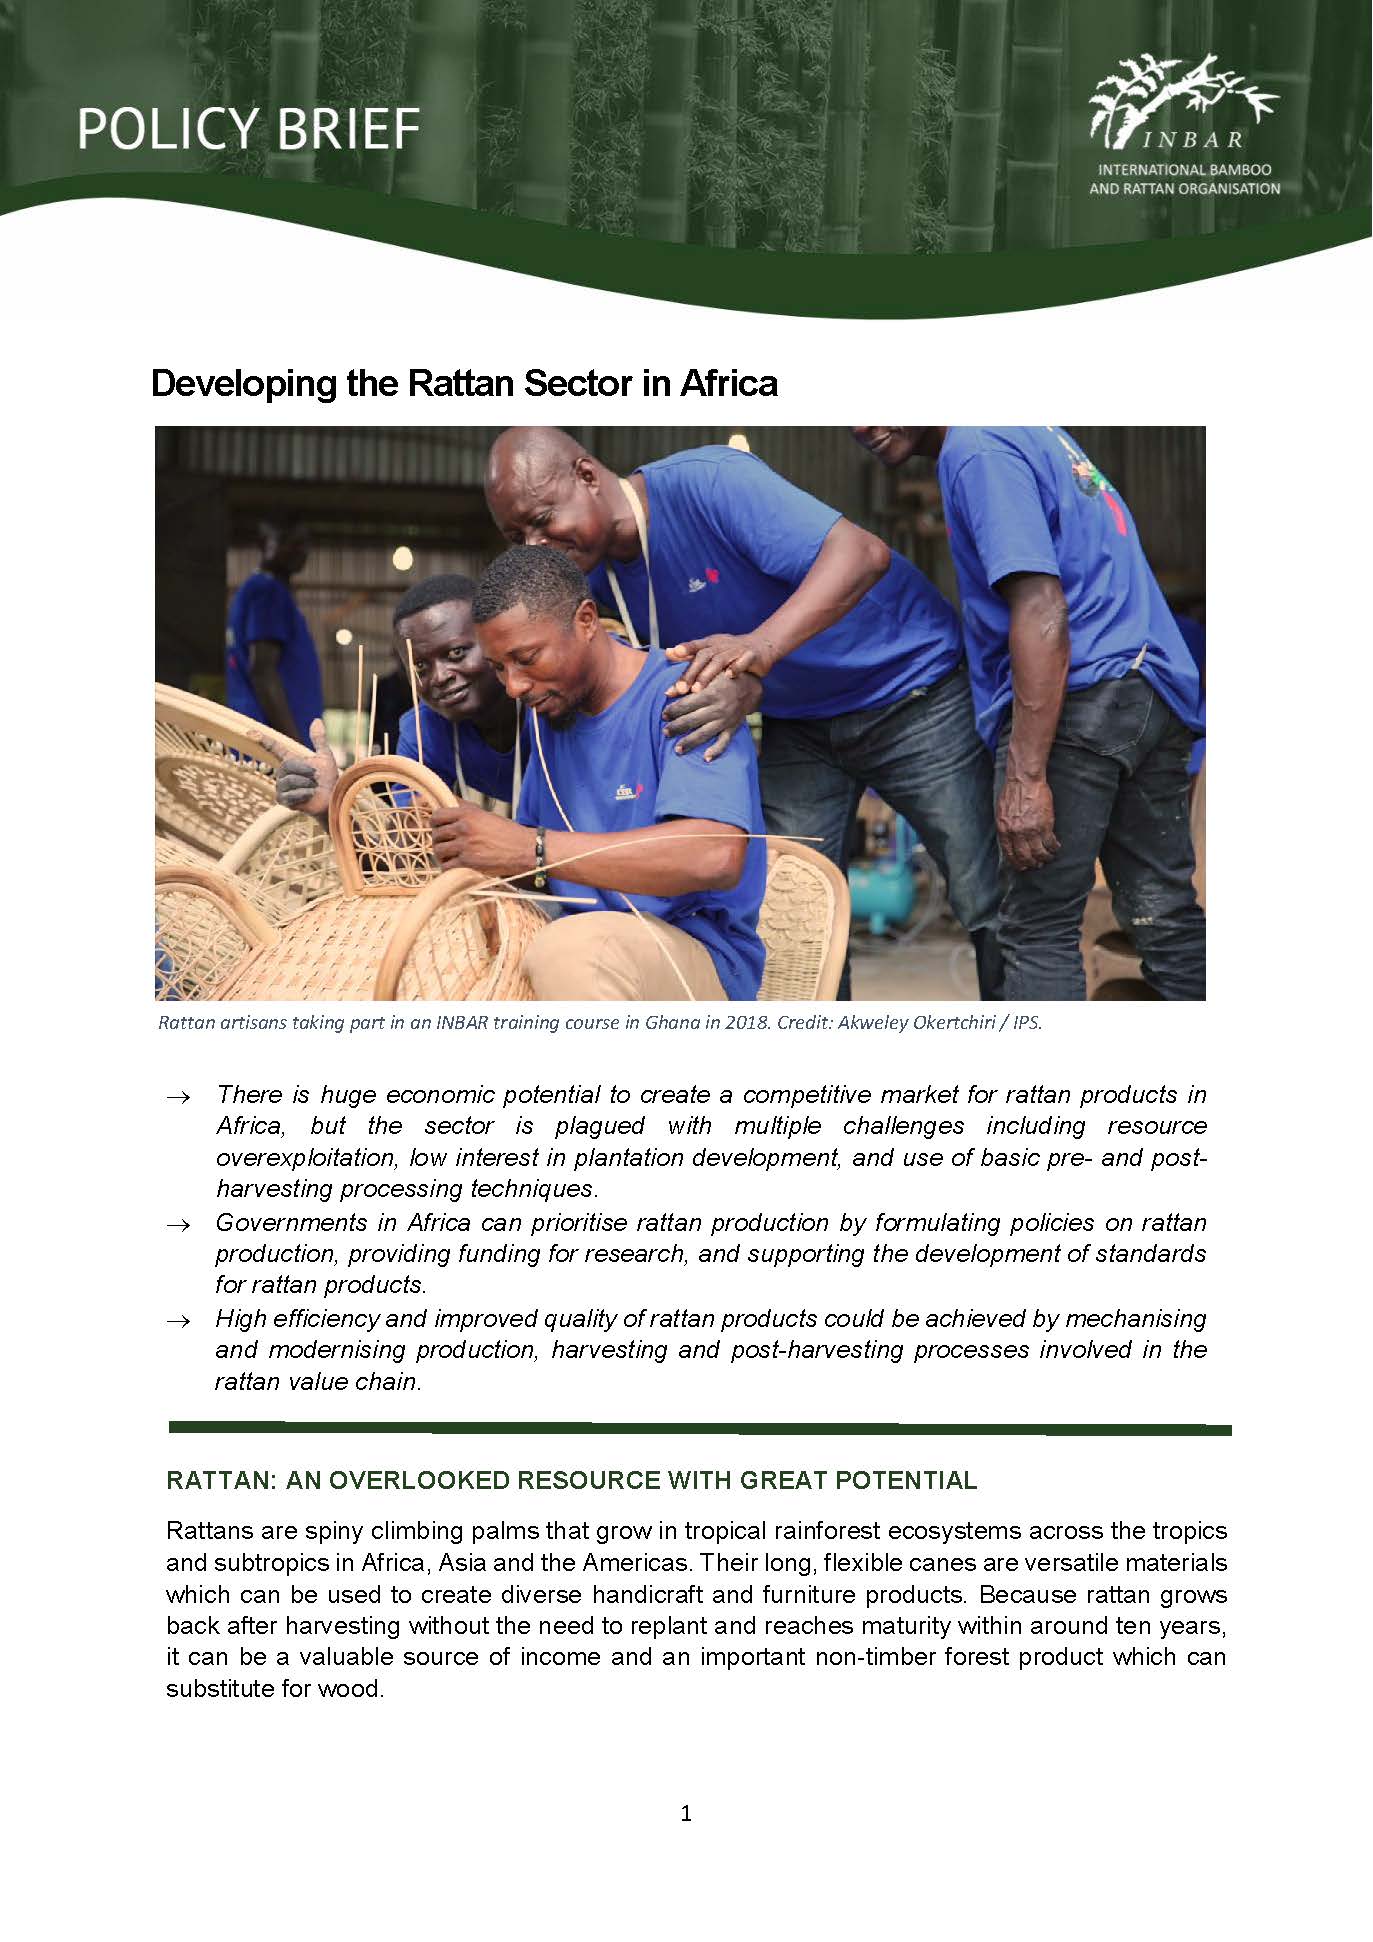 Developing the Rattan Sector in Africa